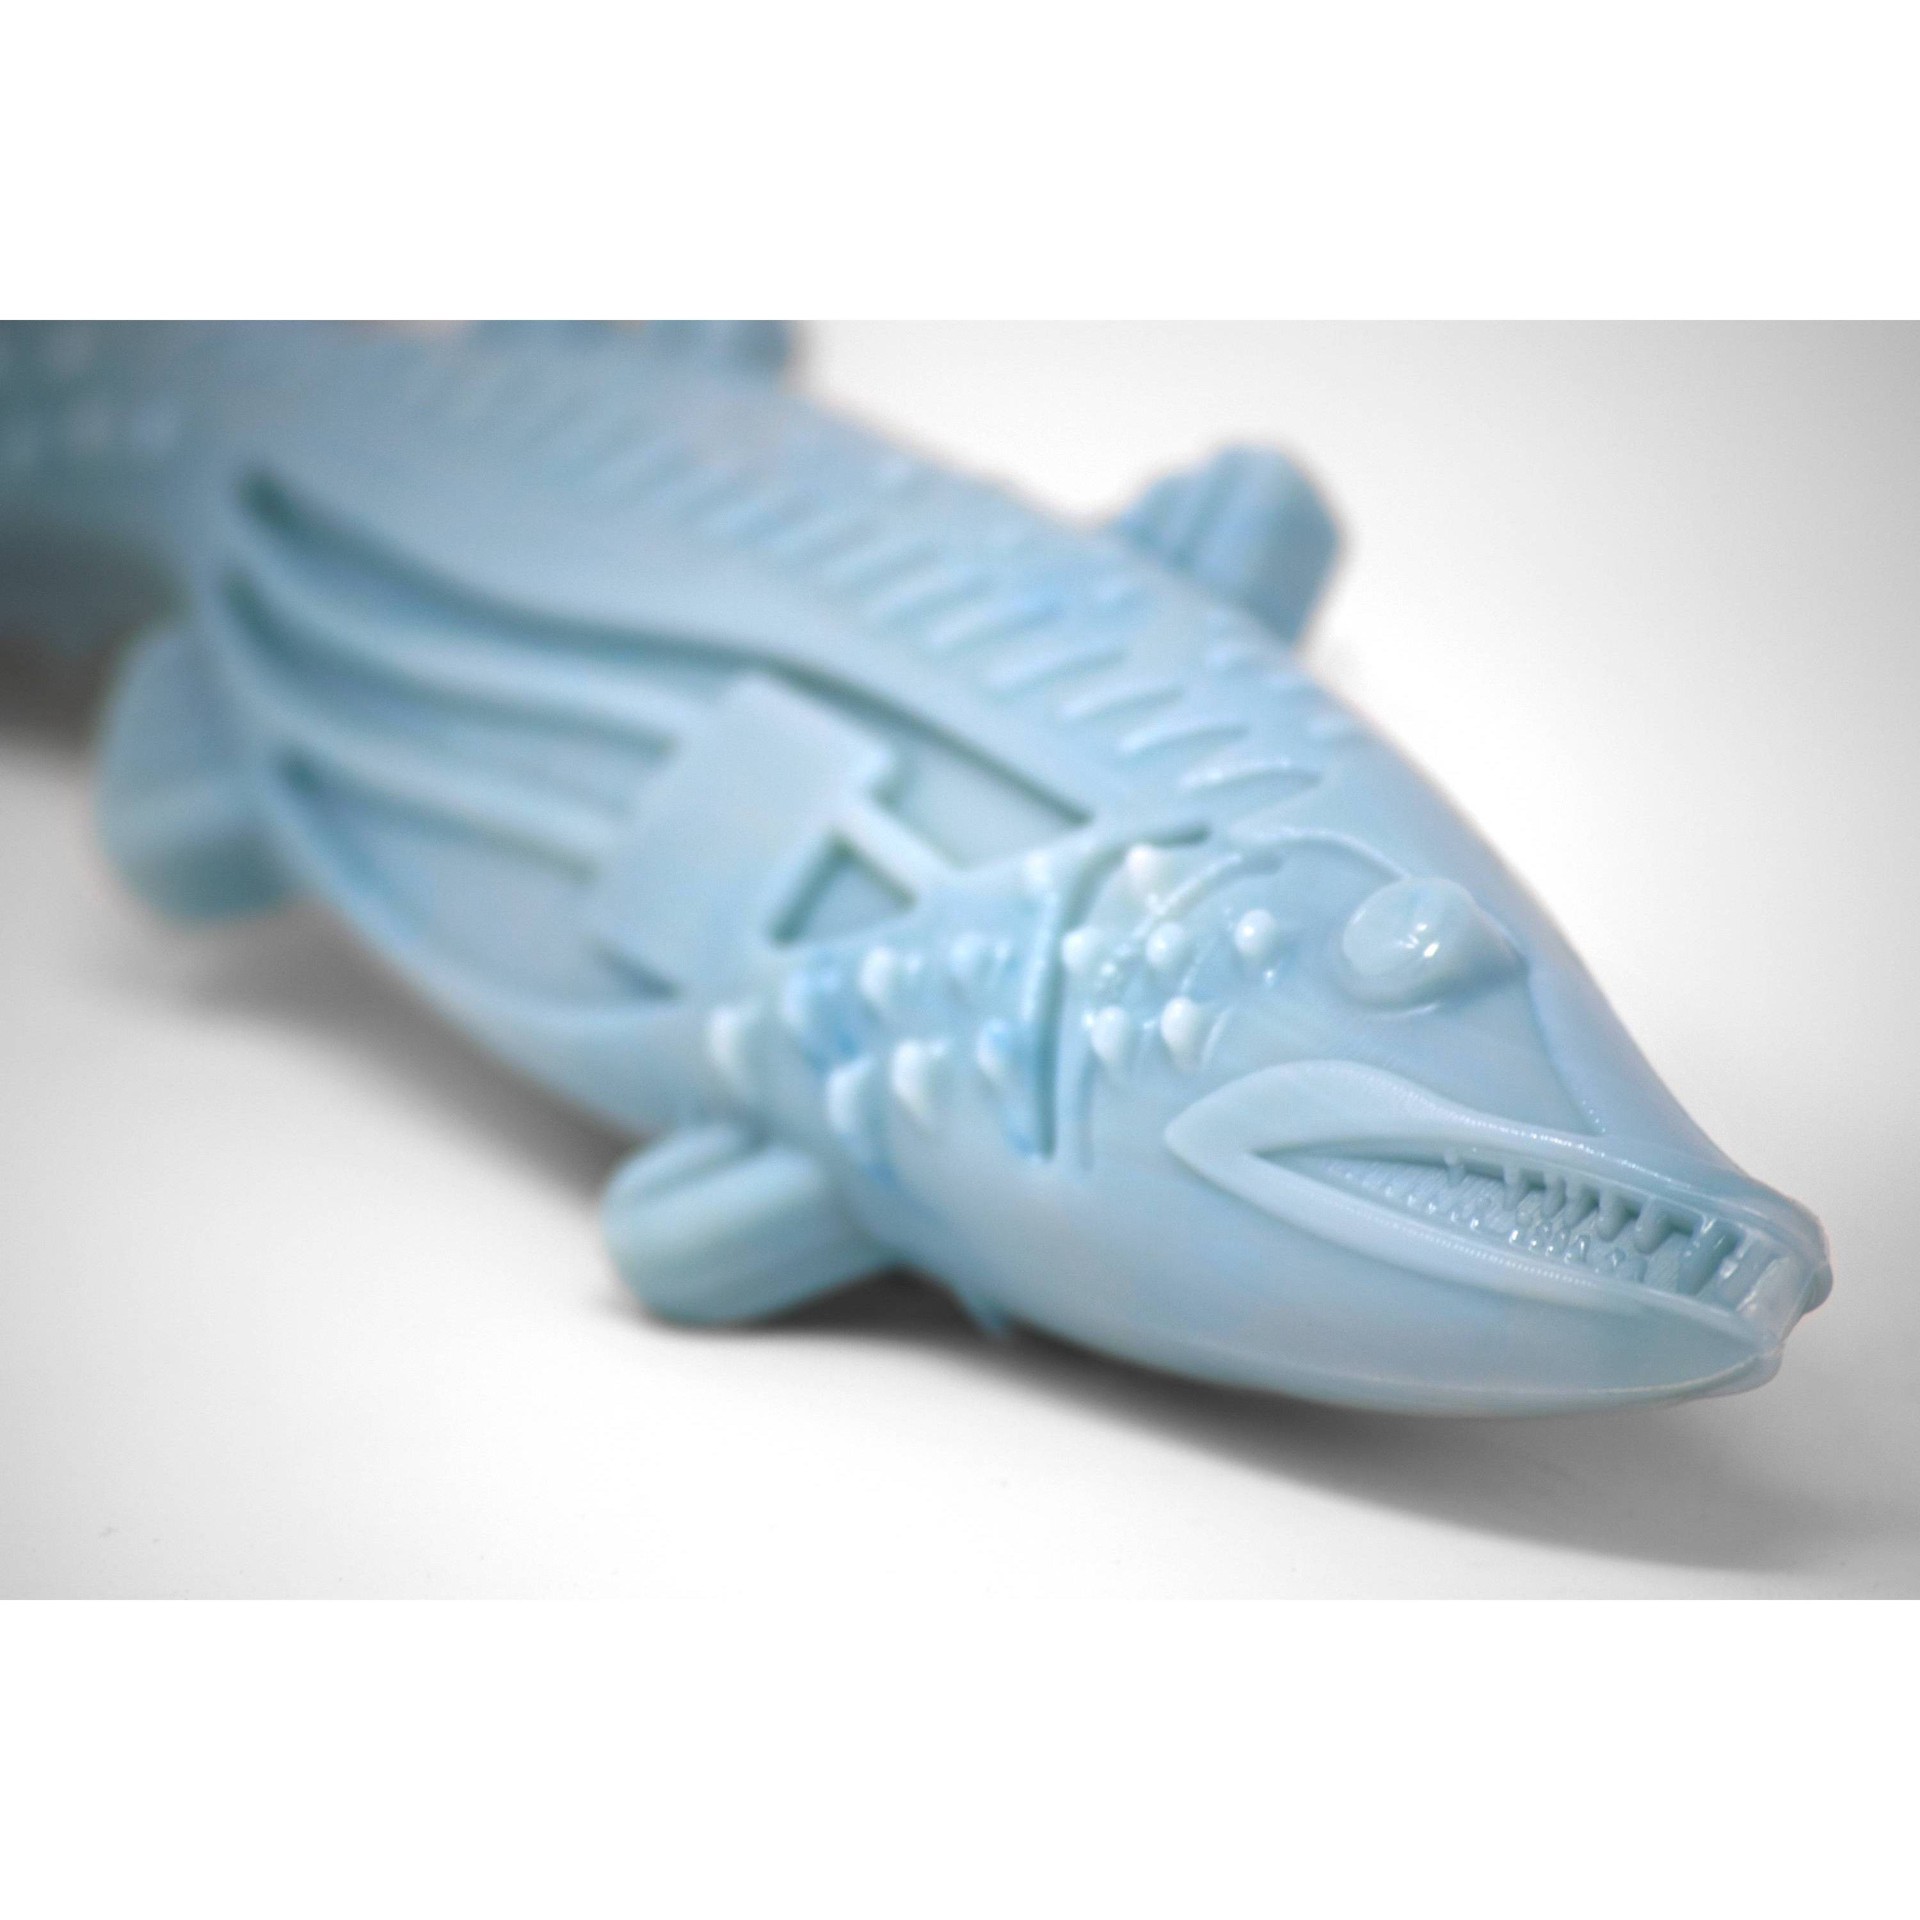 Spunky Pup Clean Earth Barracuda Chew Dog Toy 1 ct